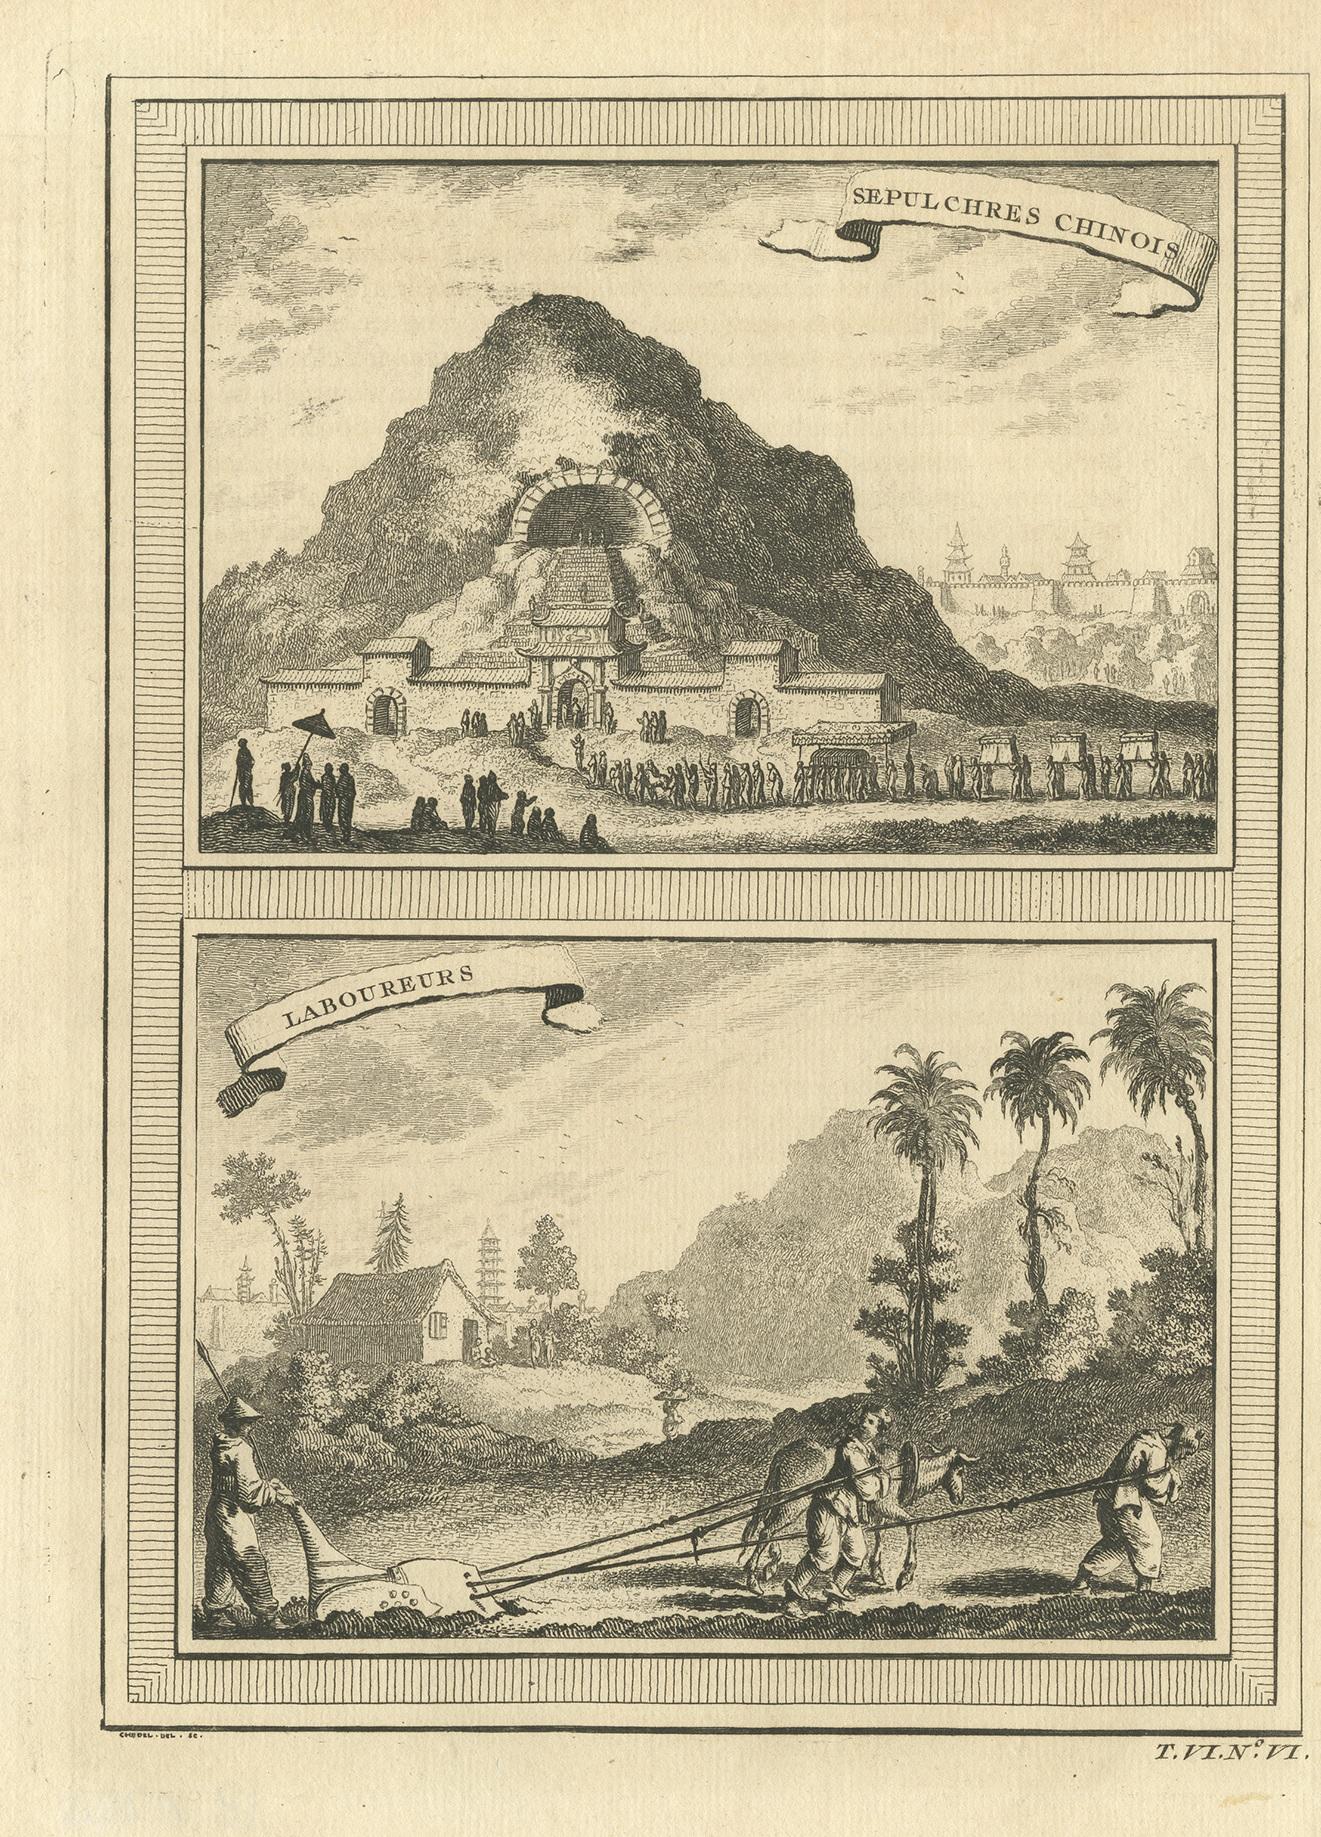 Antique print titled 'Sepulchres Chinois - Laboureurs'. View of Chinese tombs and Chinese farmers. This print originates from Prevost's 'Histoire Generale des Voyages'.